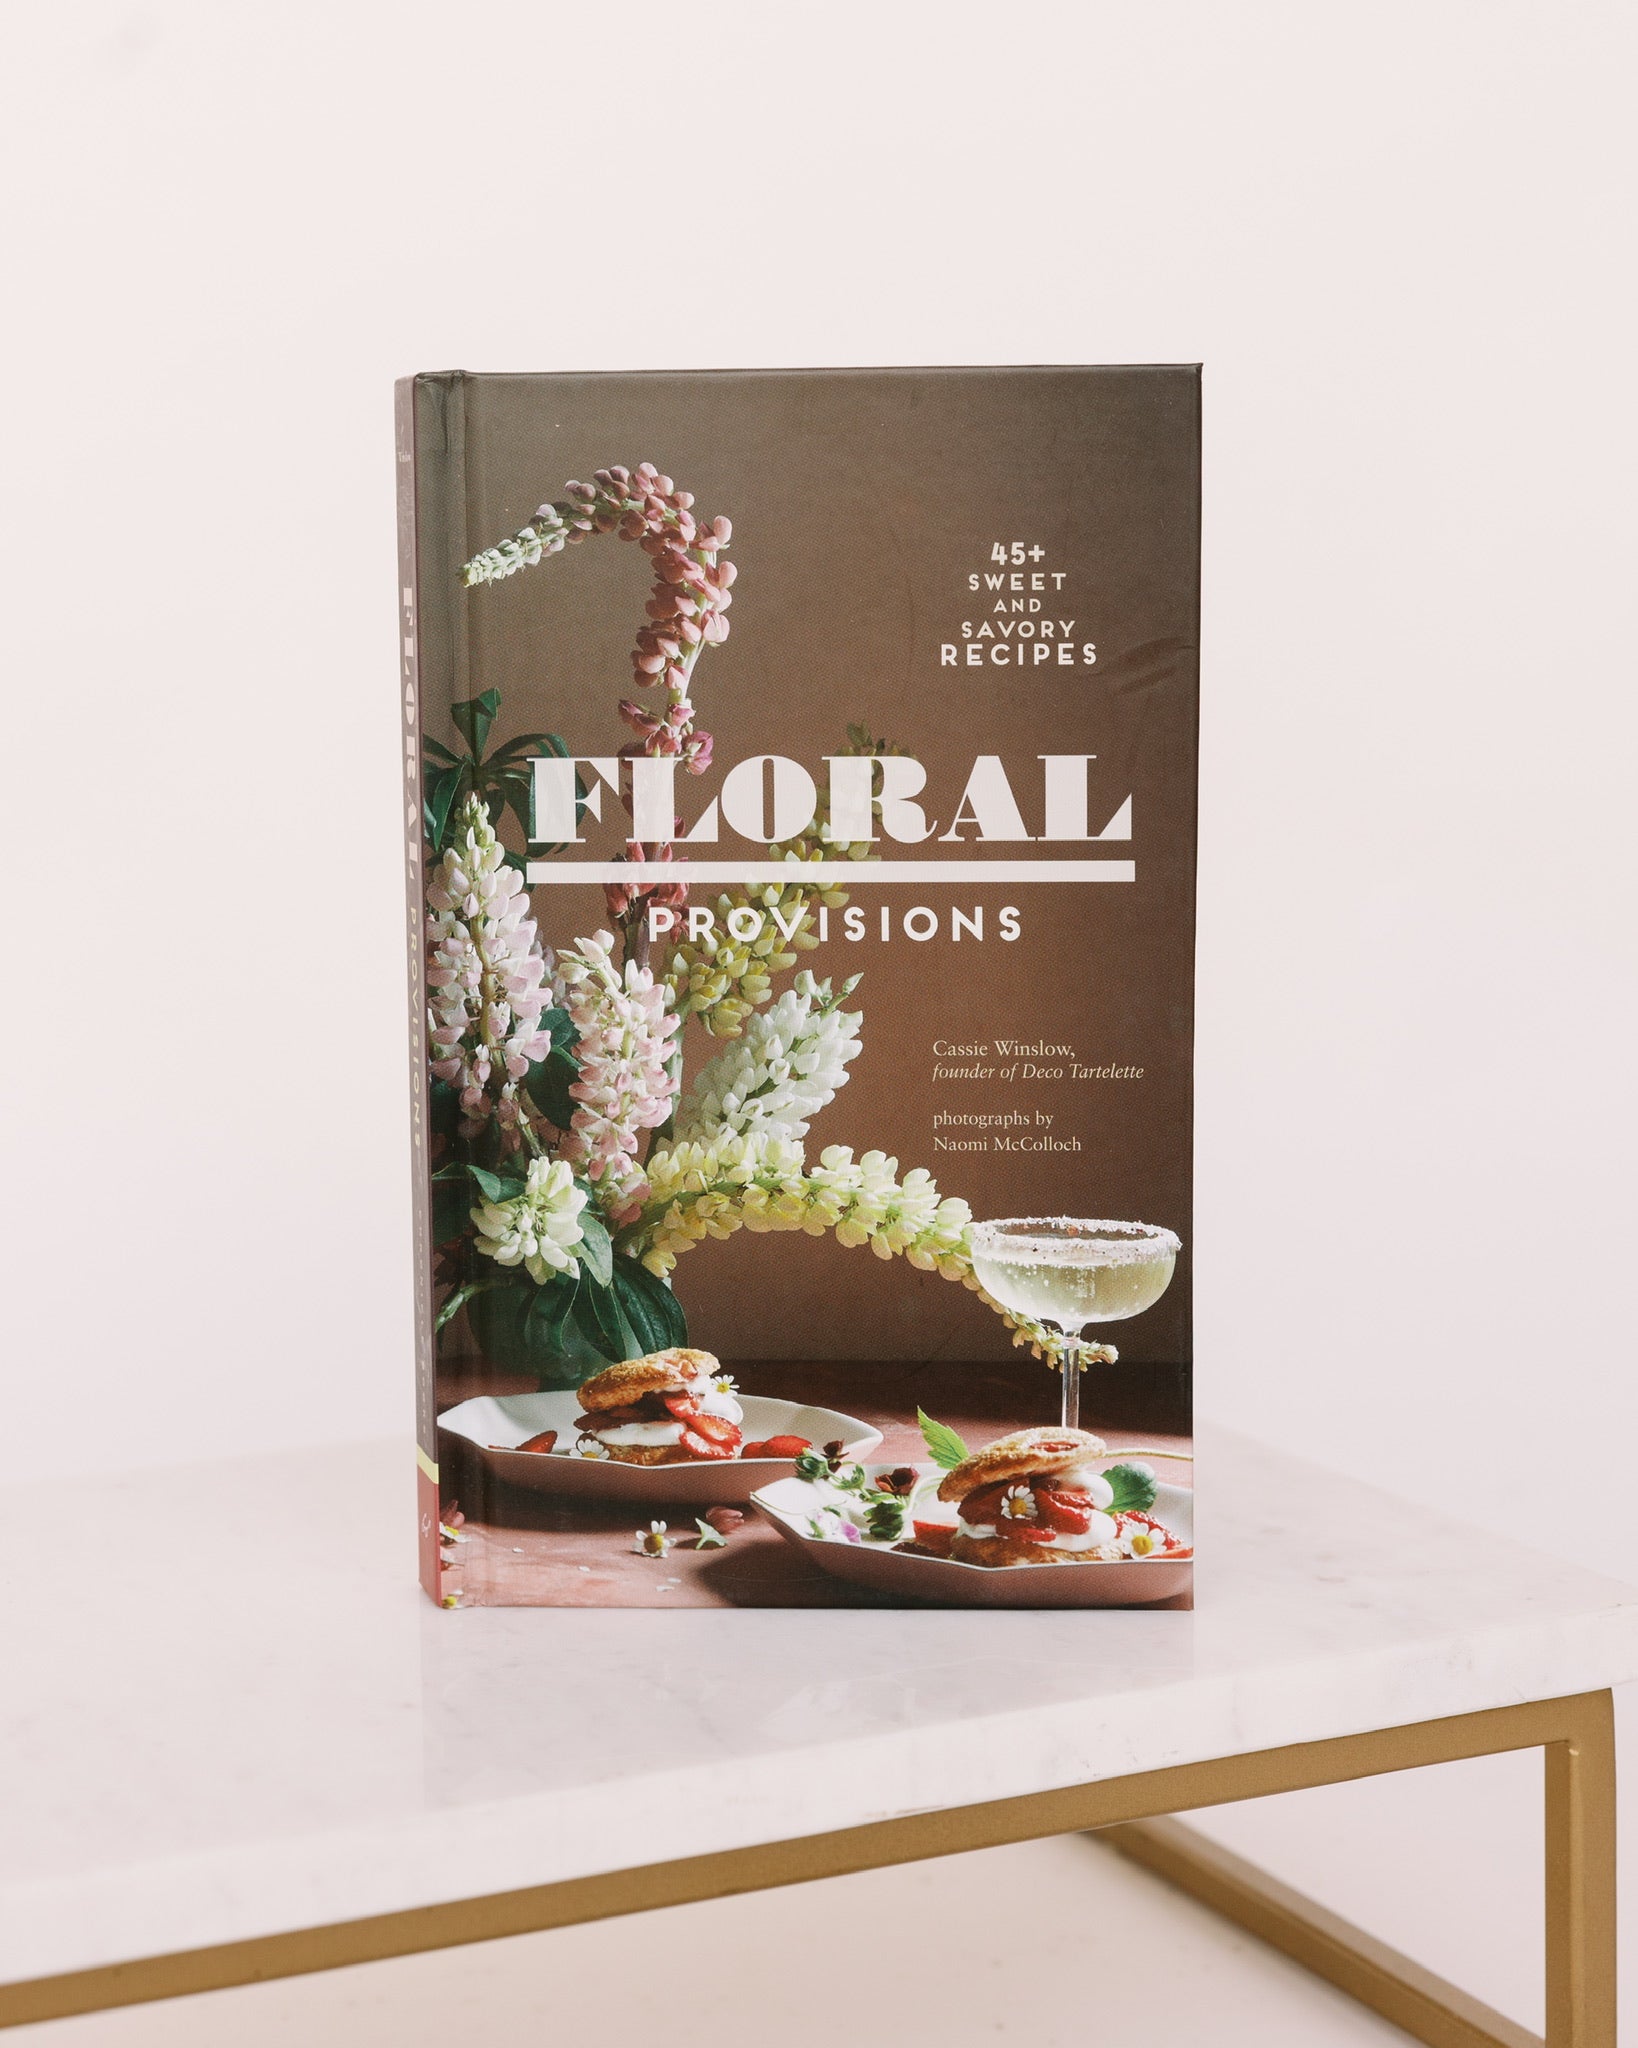 Floral Provisions - 45+ Sweet and Savory Recipes